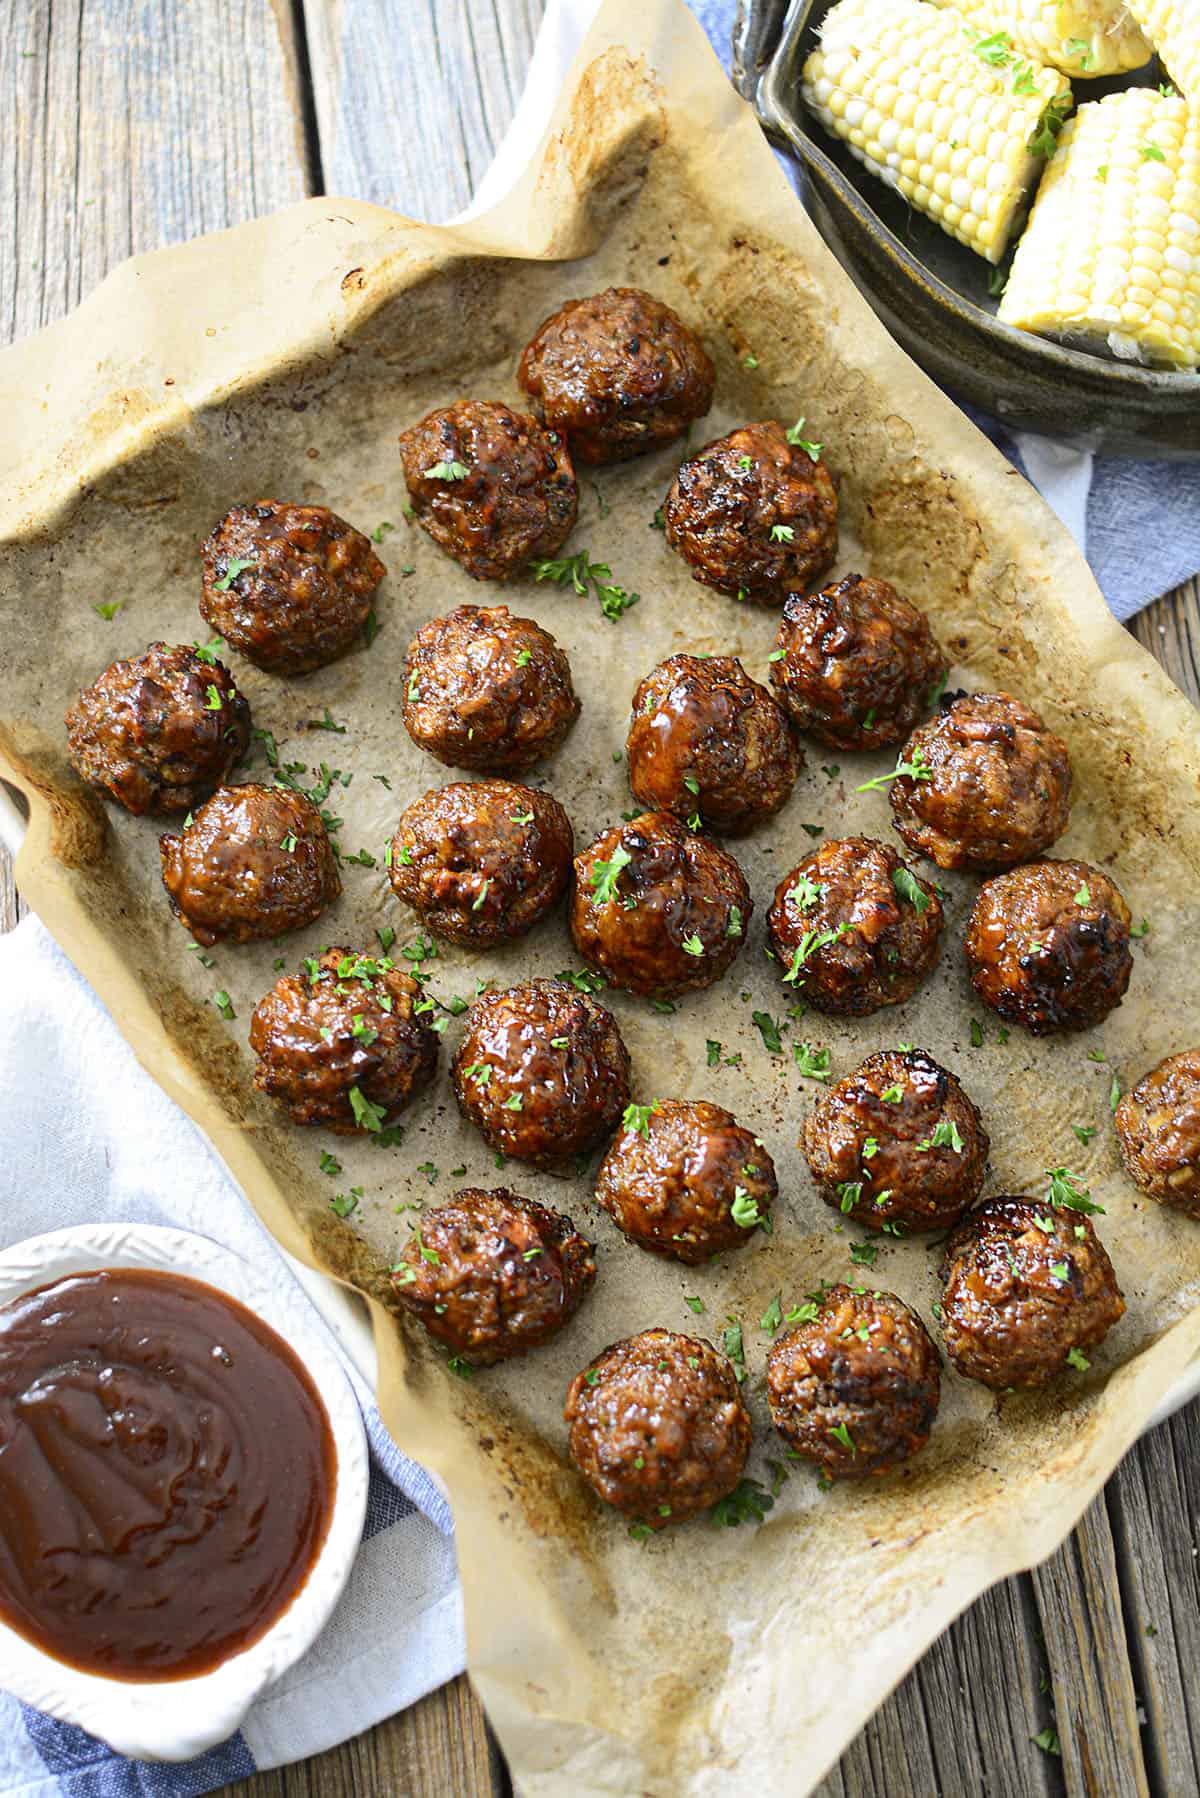 Meatballs on a baking sheet with corn on the upper right and bbq sauce on the bottom left.